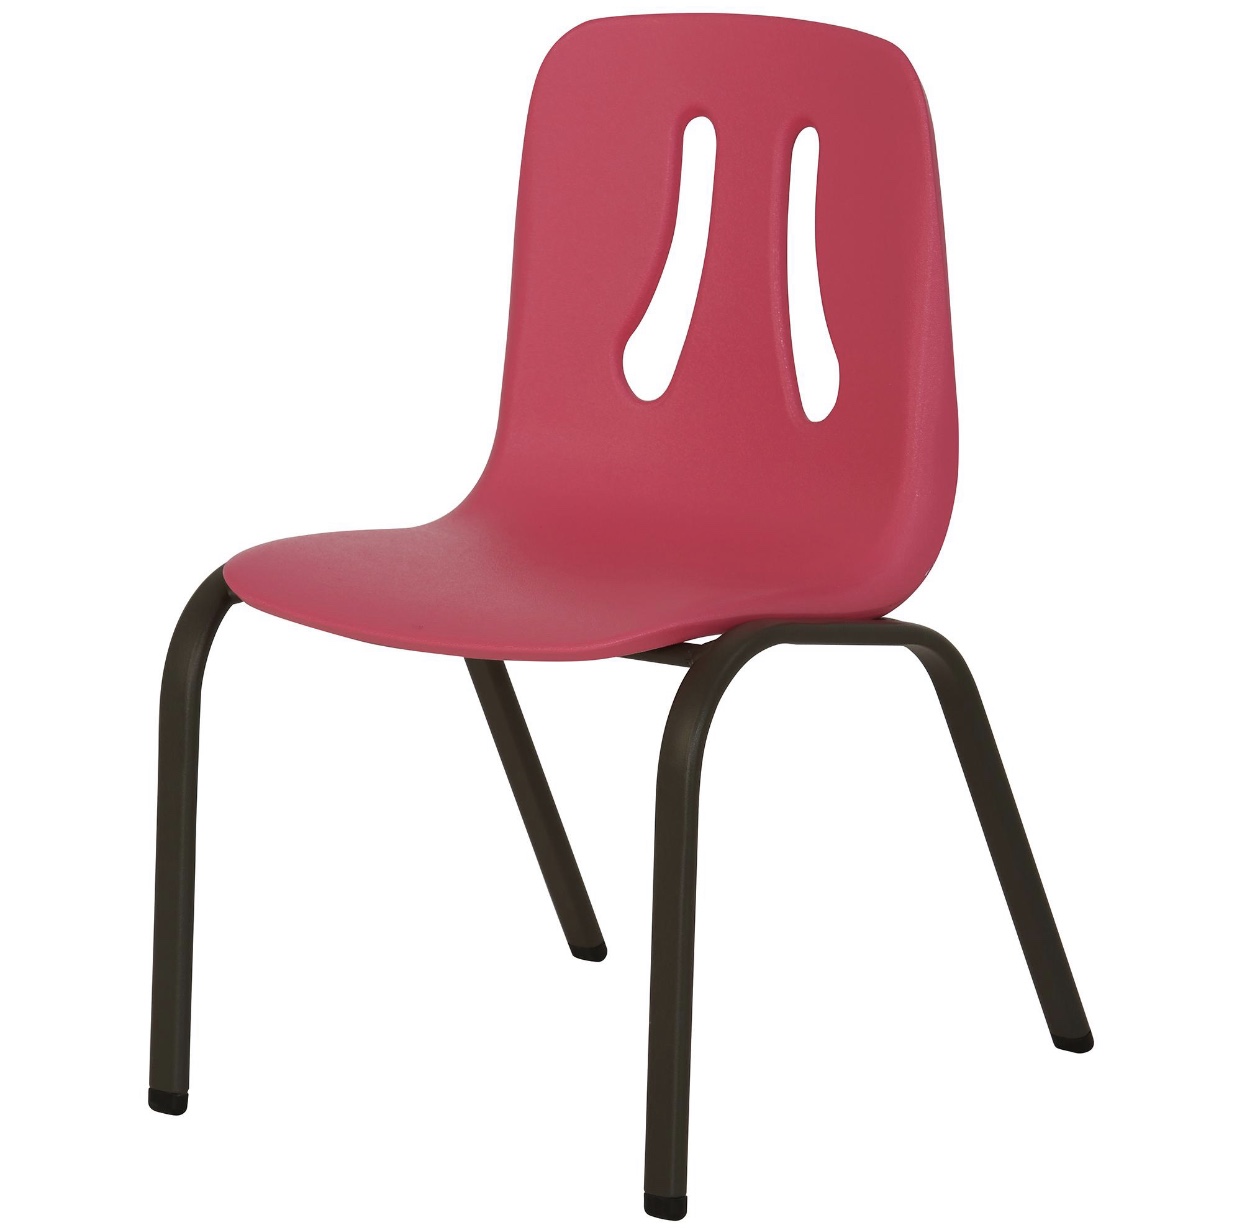 lifetime kids stacking chair